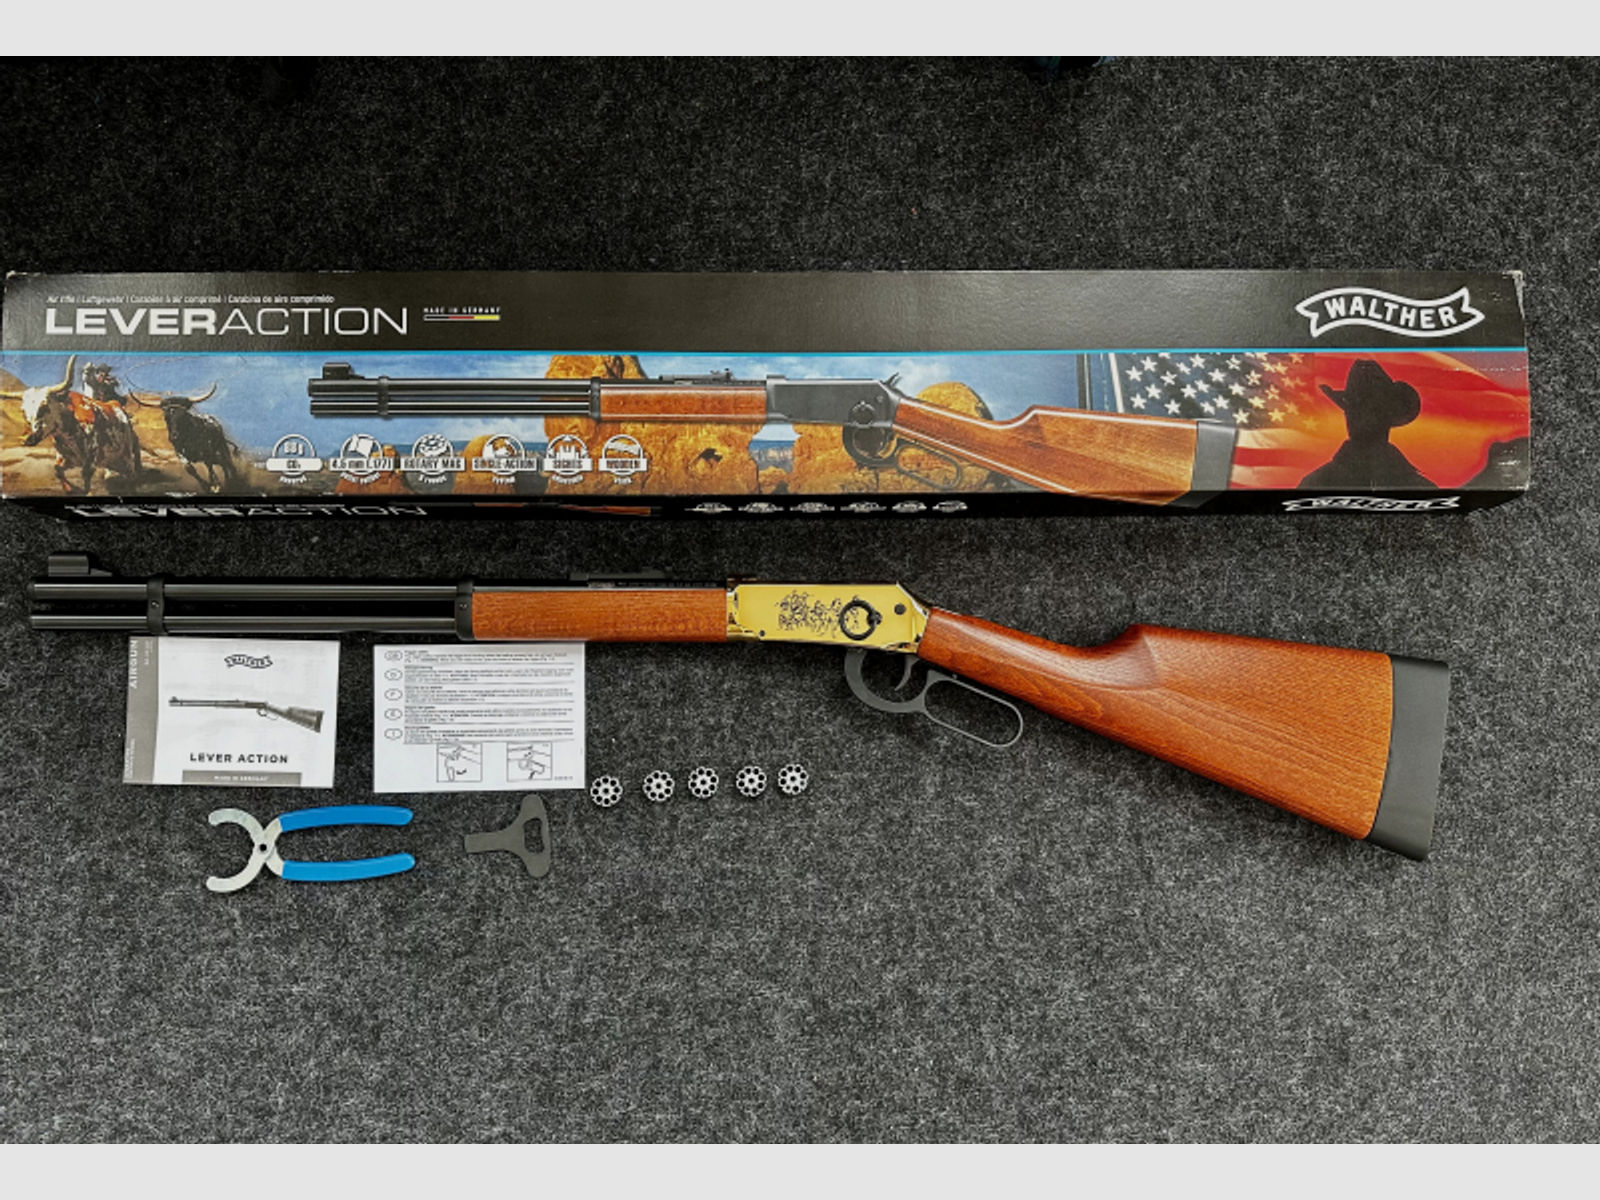 Walther Lever Action Wells Fargo Edition